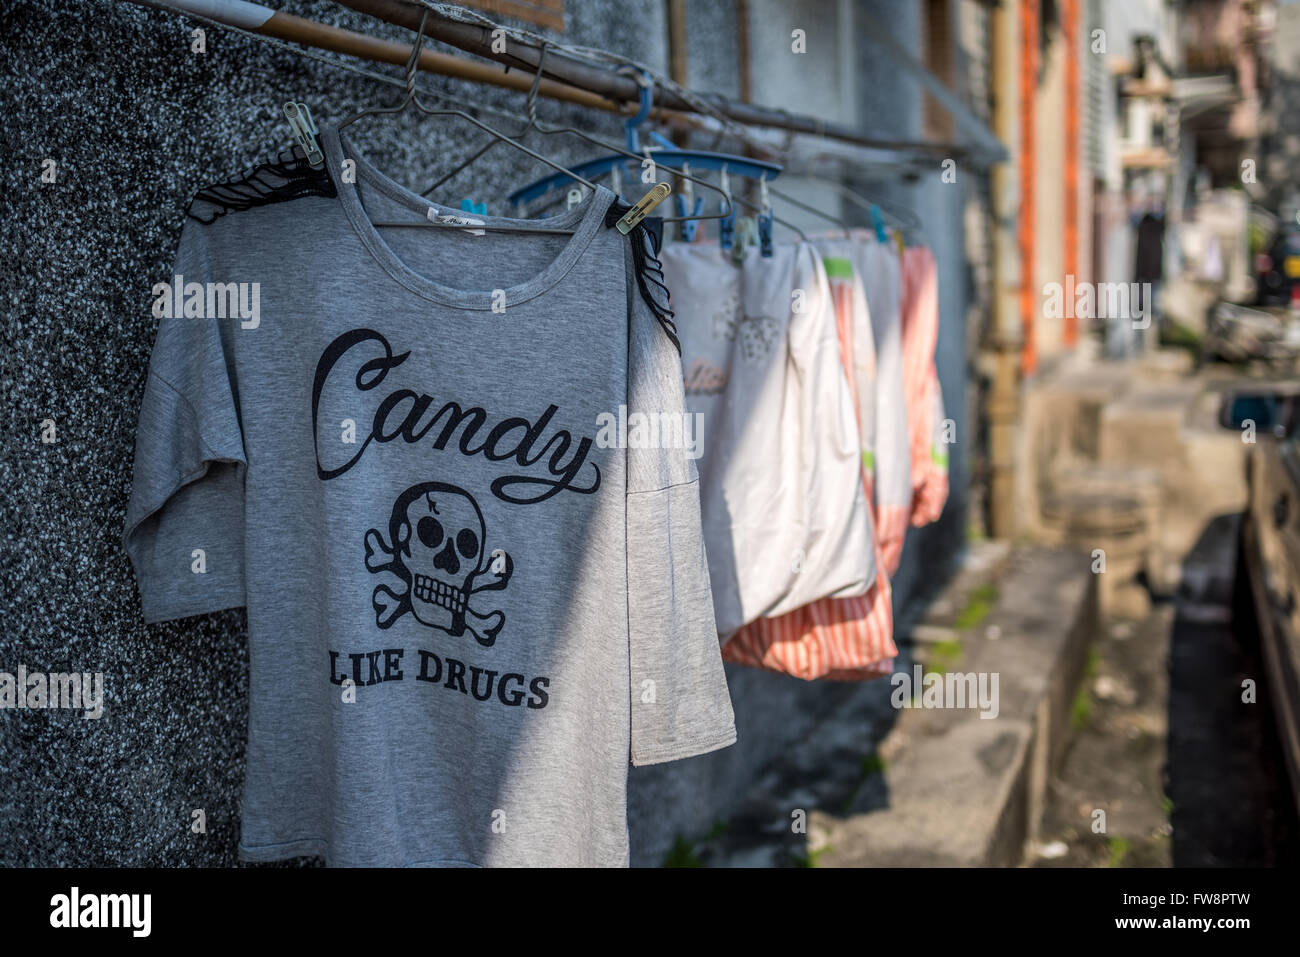 Clothes hanging to dry in a village in Hong Kong Stock Photo